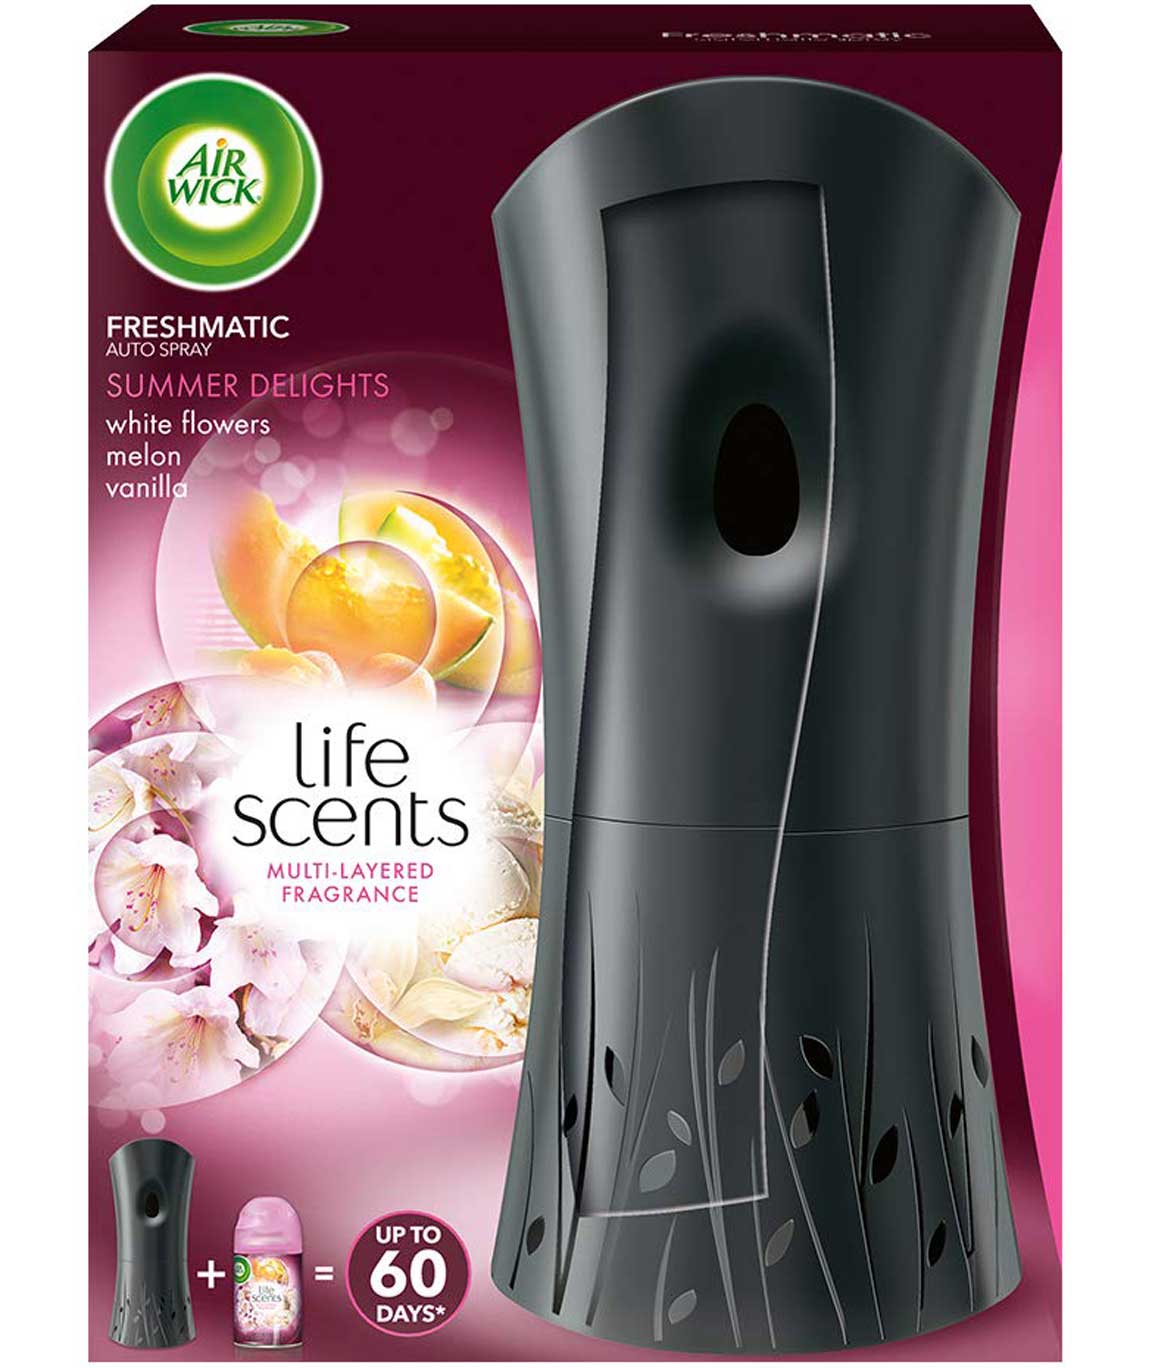 Airwick Freshmatic Life Scents Air-freshner Complete Kit [Machine + Summer Delights refill - 250 ml]